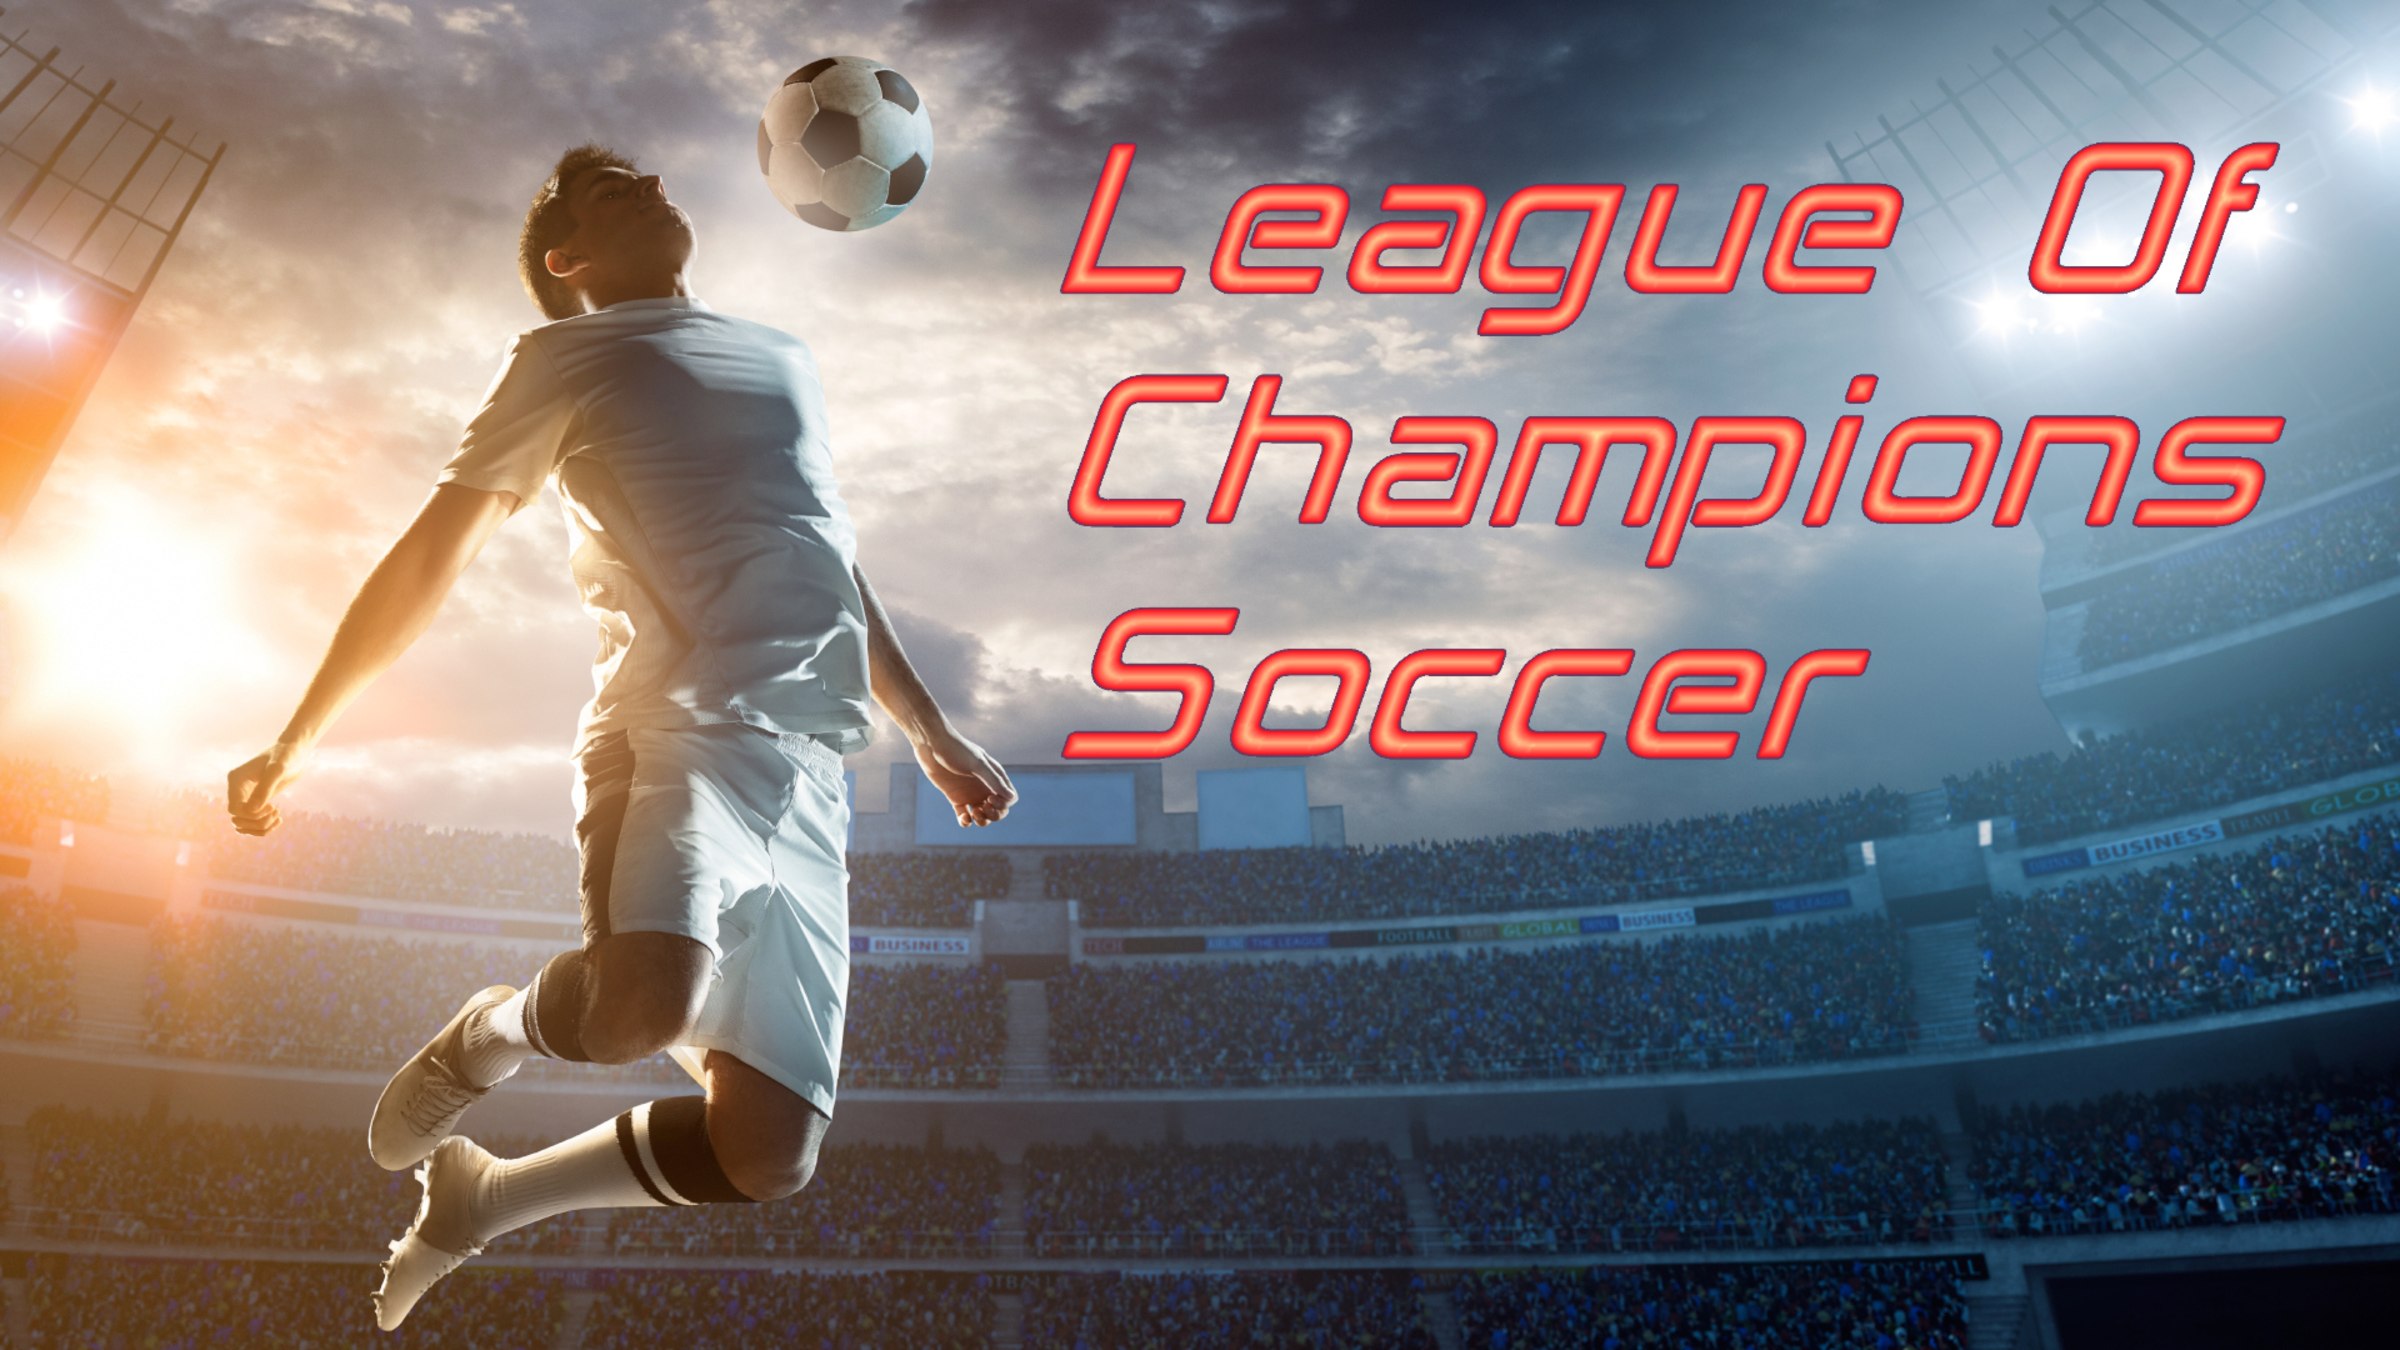 The Champions 3D Game  Football games online, Sports games, Games